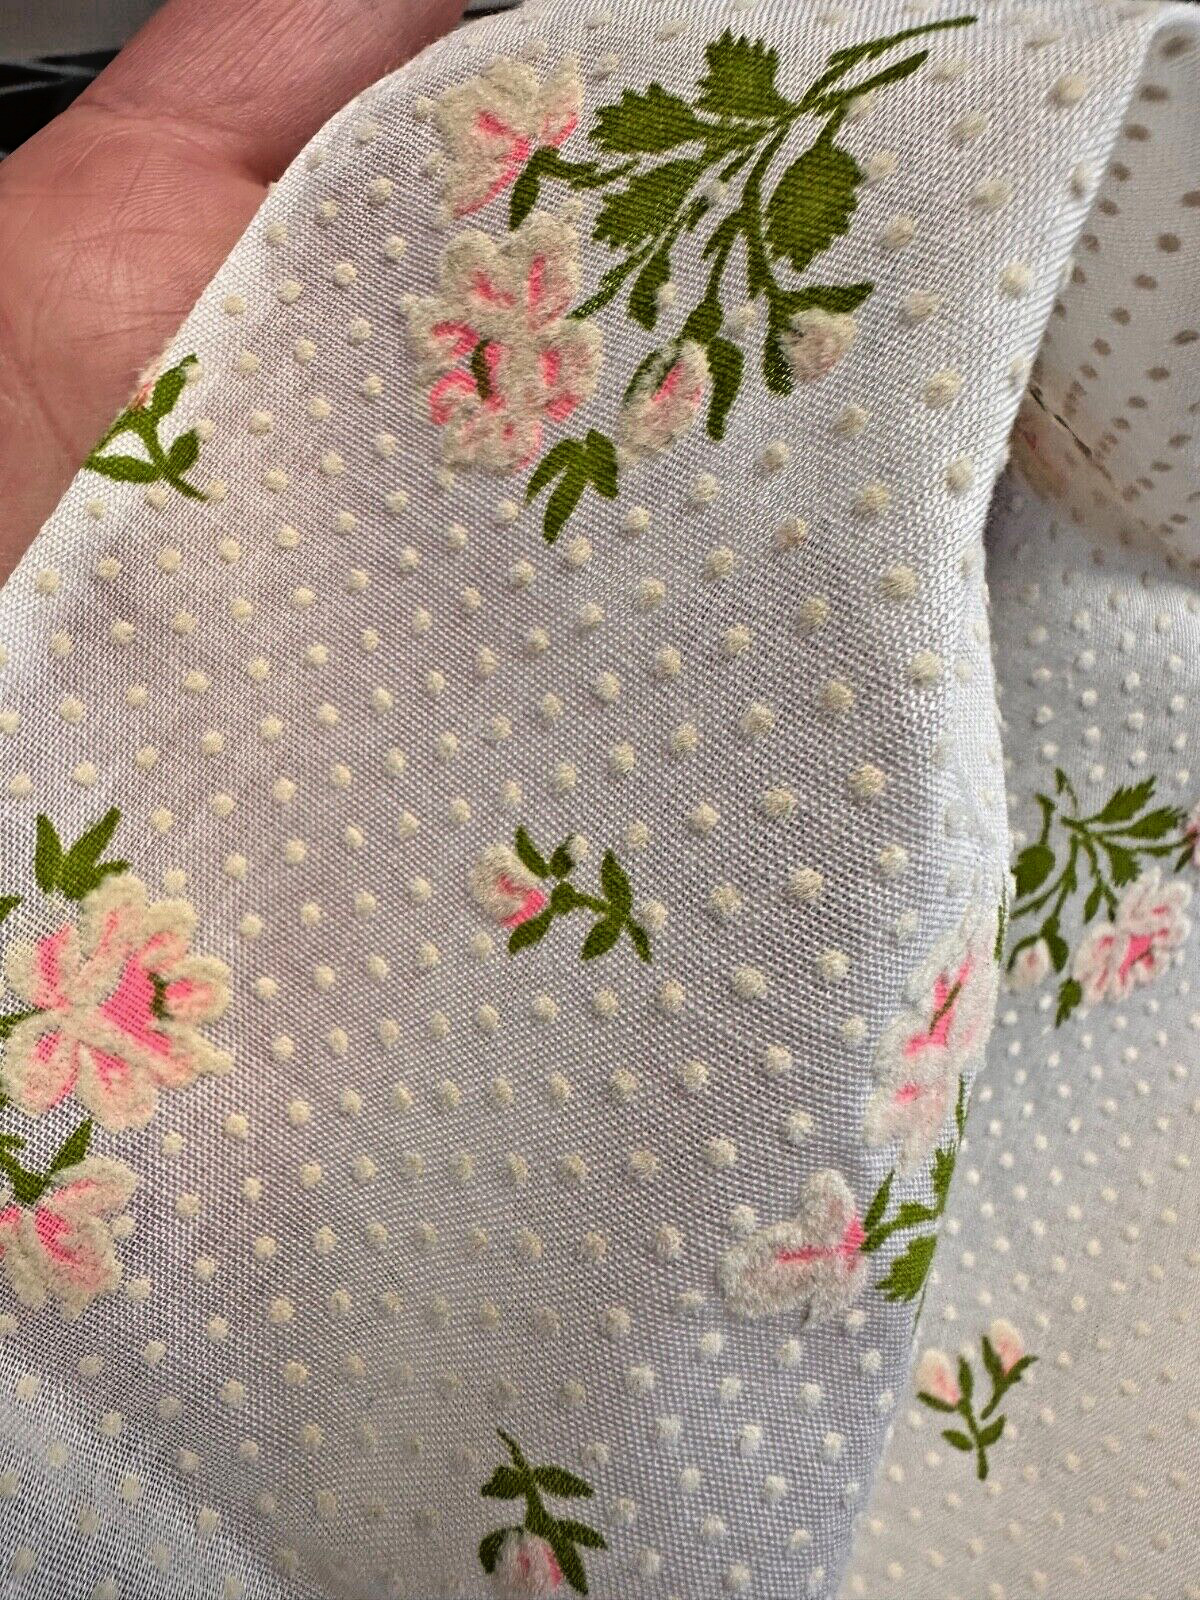 Vintage Swiss Dot Fabric- White with Flocked pink flowers 1.5 yards